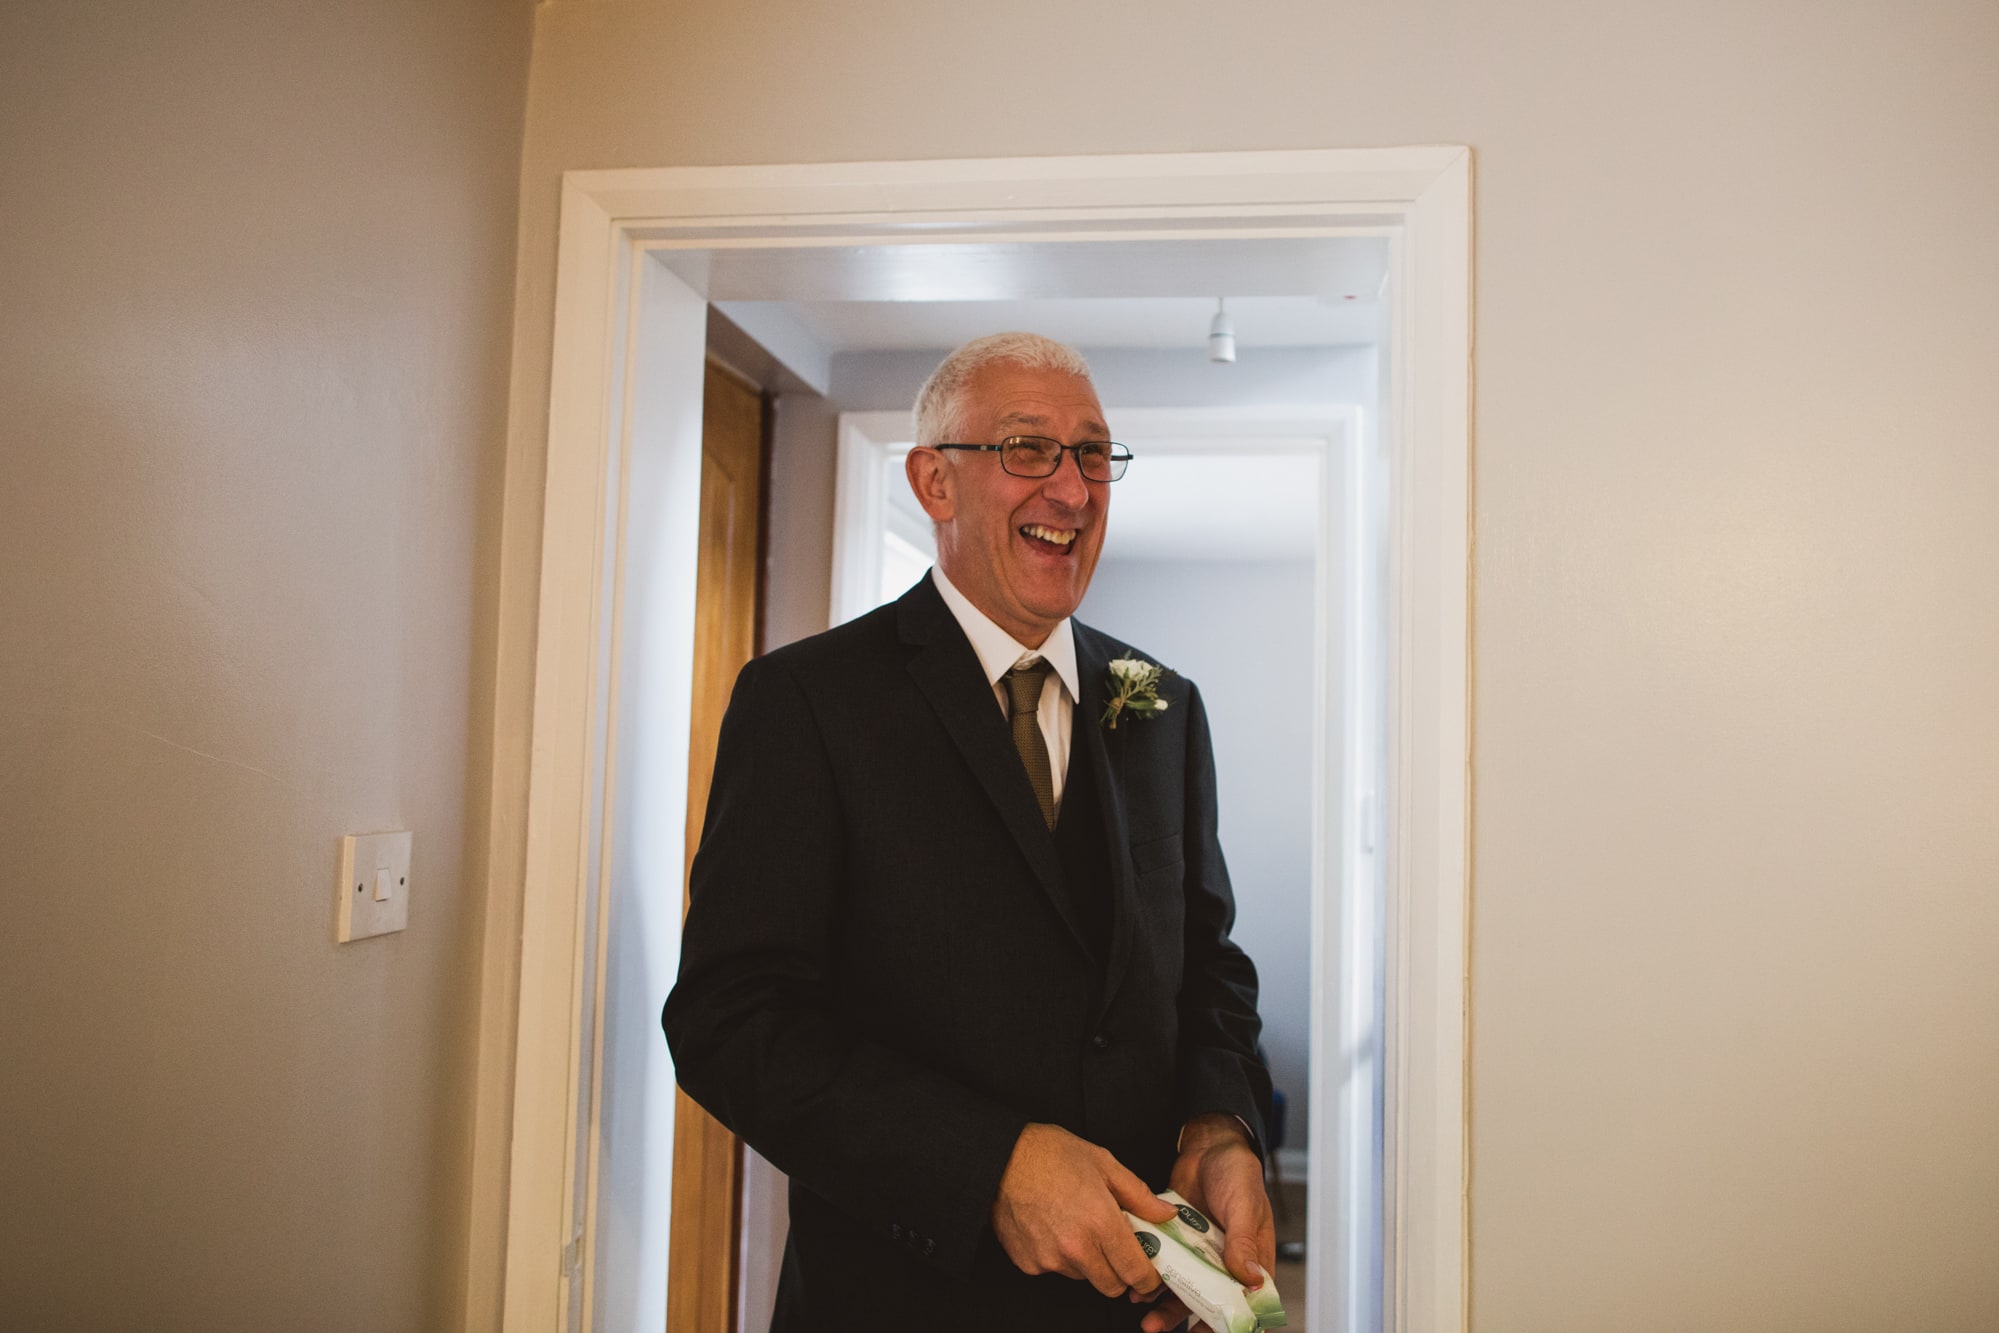 dad seeing bride for first time